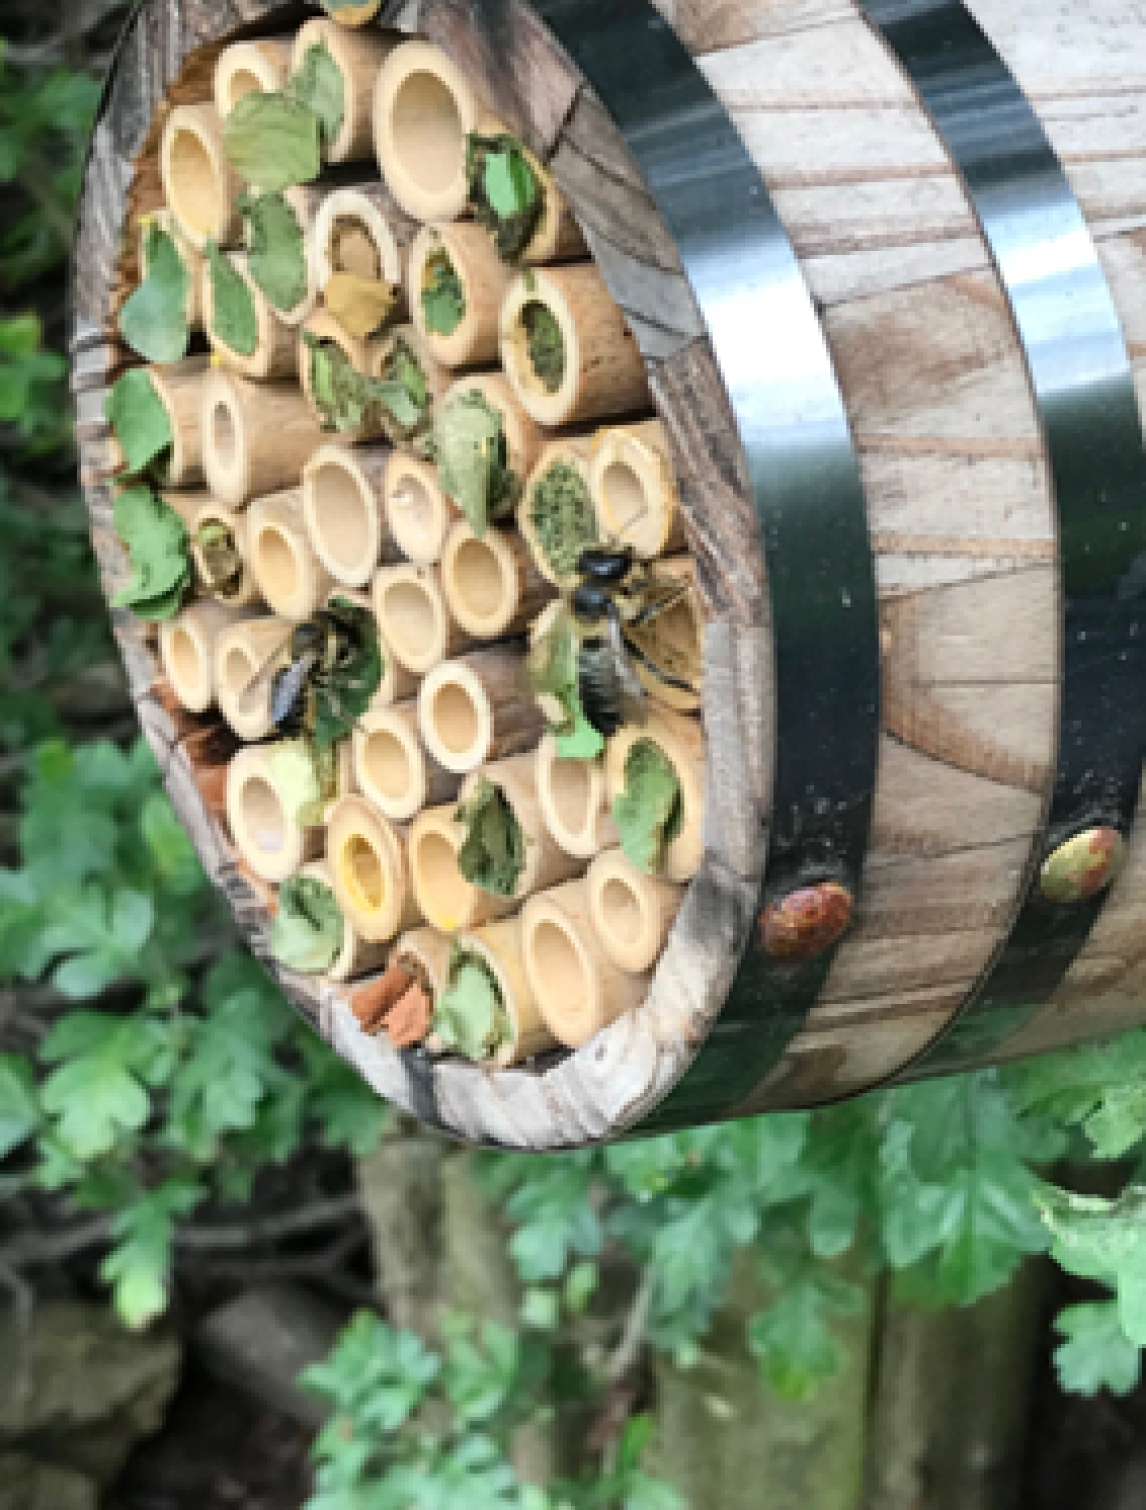 Solitary bees nesting at Westerfield